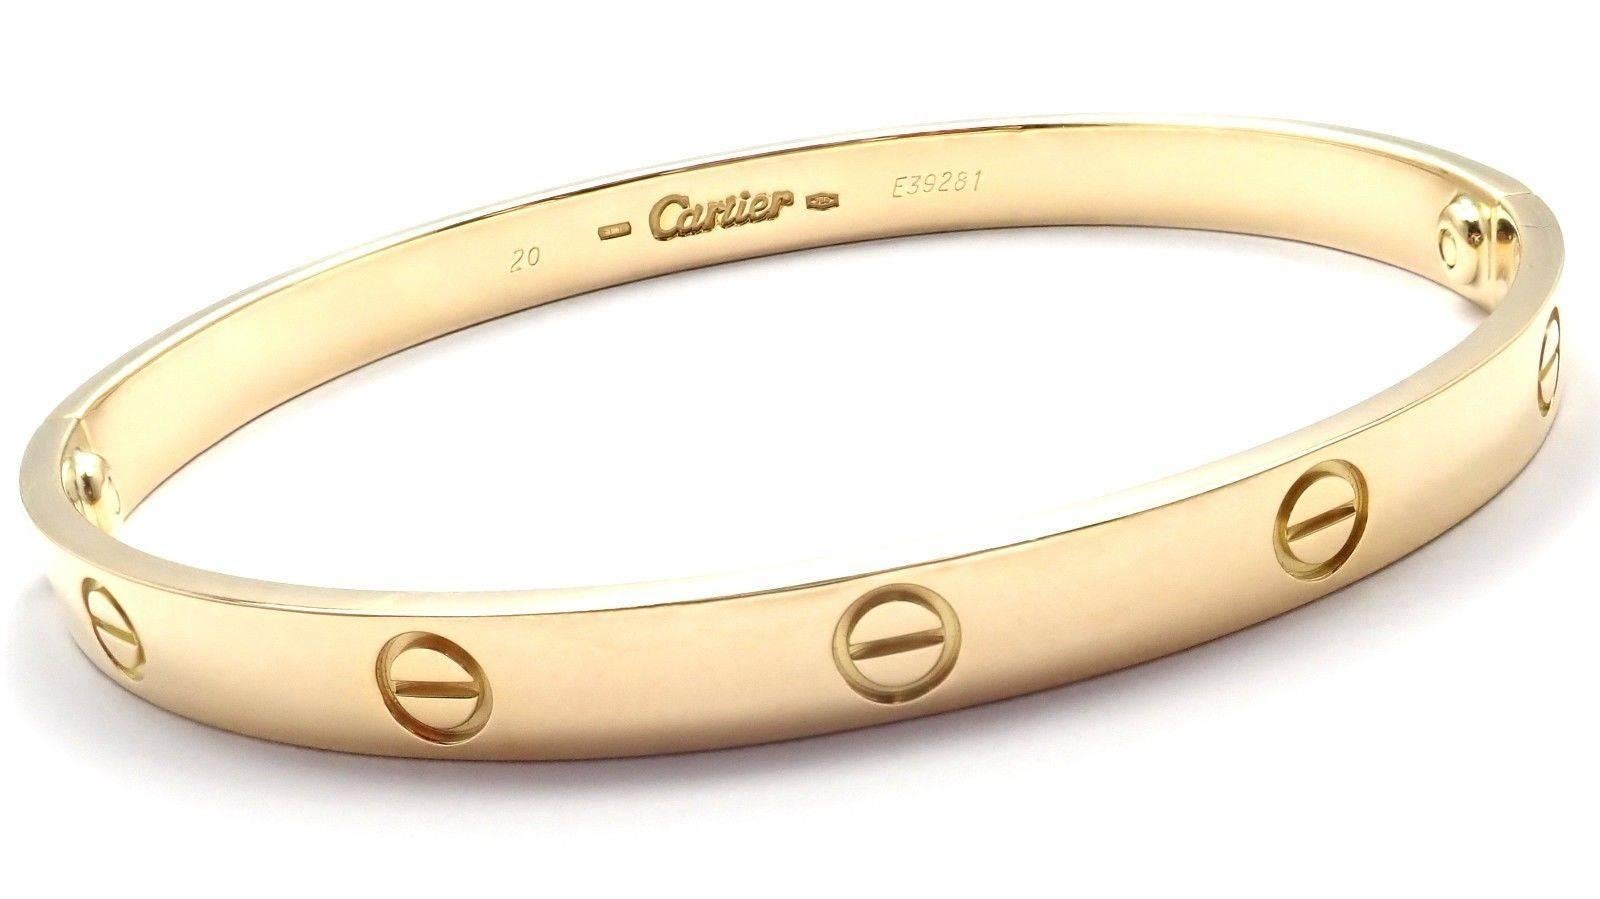 18k Yellow Gold Love Bangle Bracelet by Cartier Size 20.
This bracelet comes with Cartier service paper, box and screwdriver.
Details: 
Size: 20
Weight: 36.7 grams
Width: 6.5mm 
Hallmarks: Cartier 750 20 E39291
*Free Shipping within the United